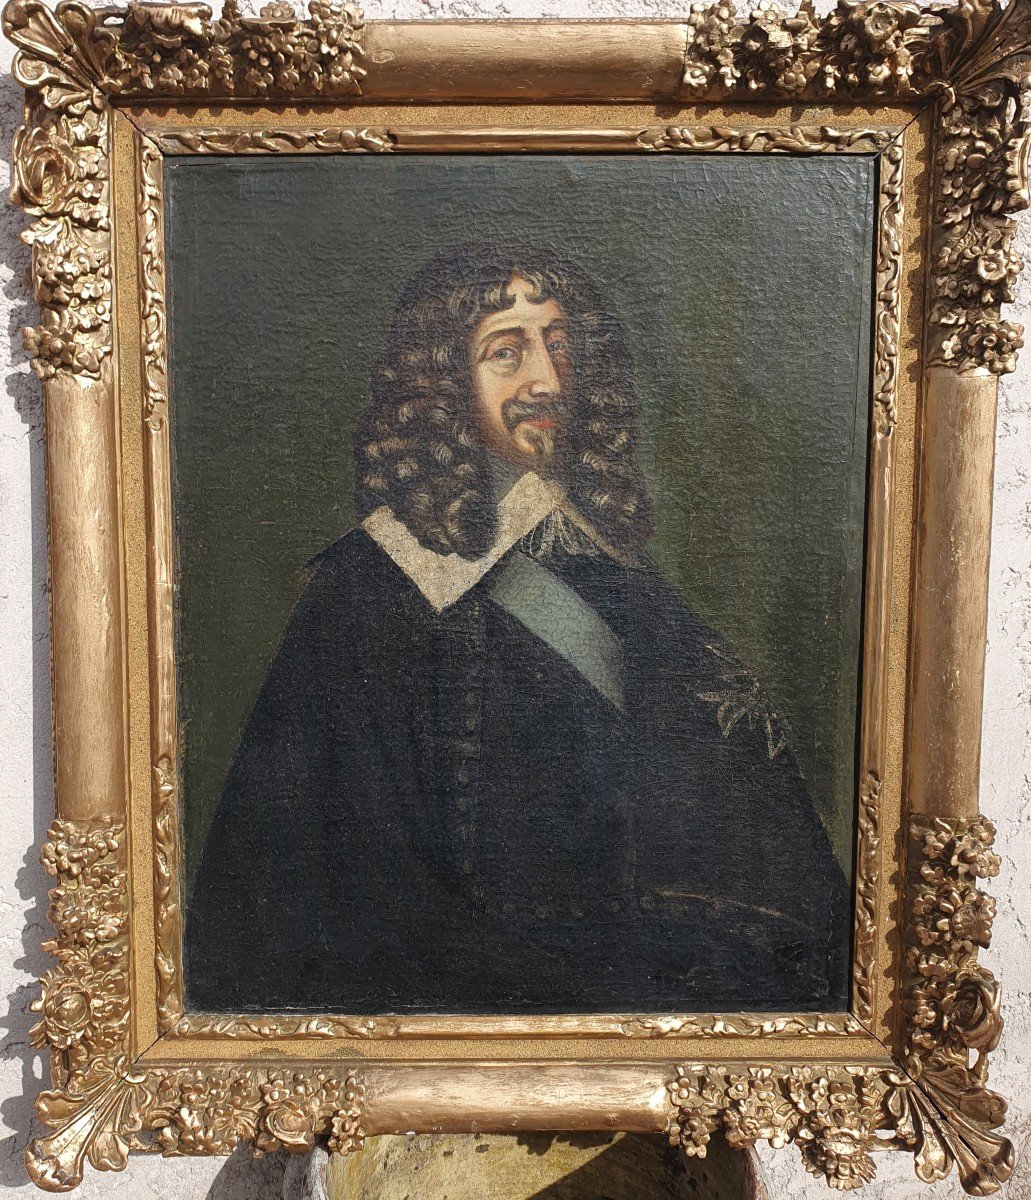 Louis XIII 1601-1643 King of France, 1610-1643